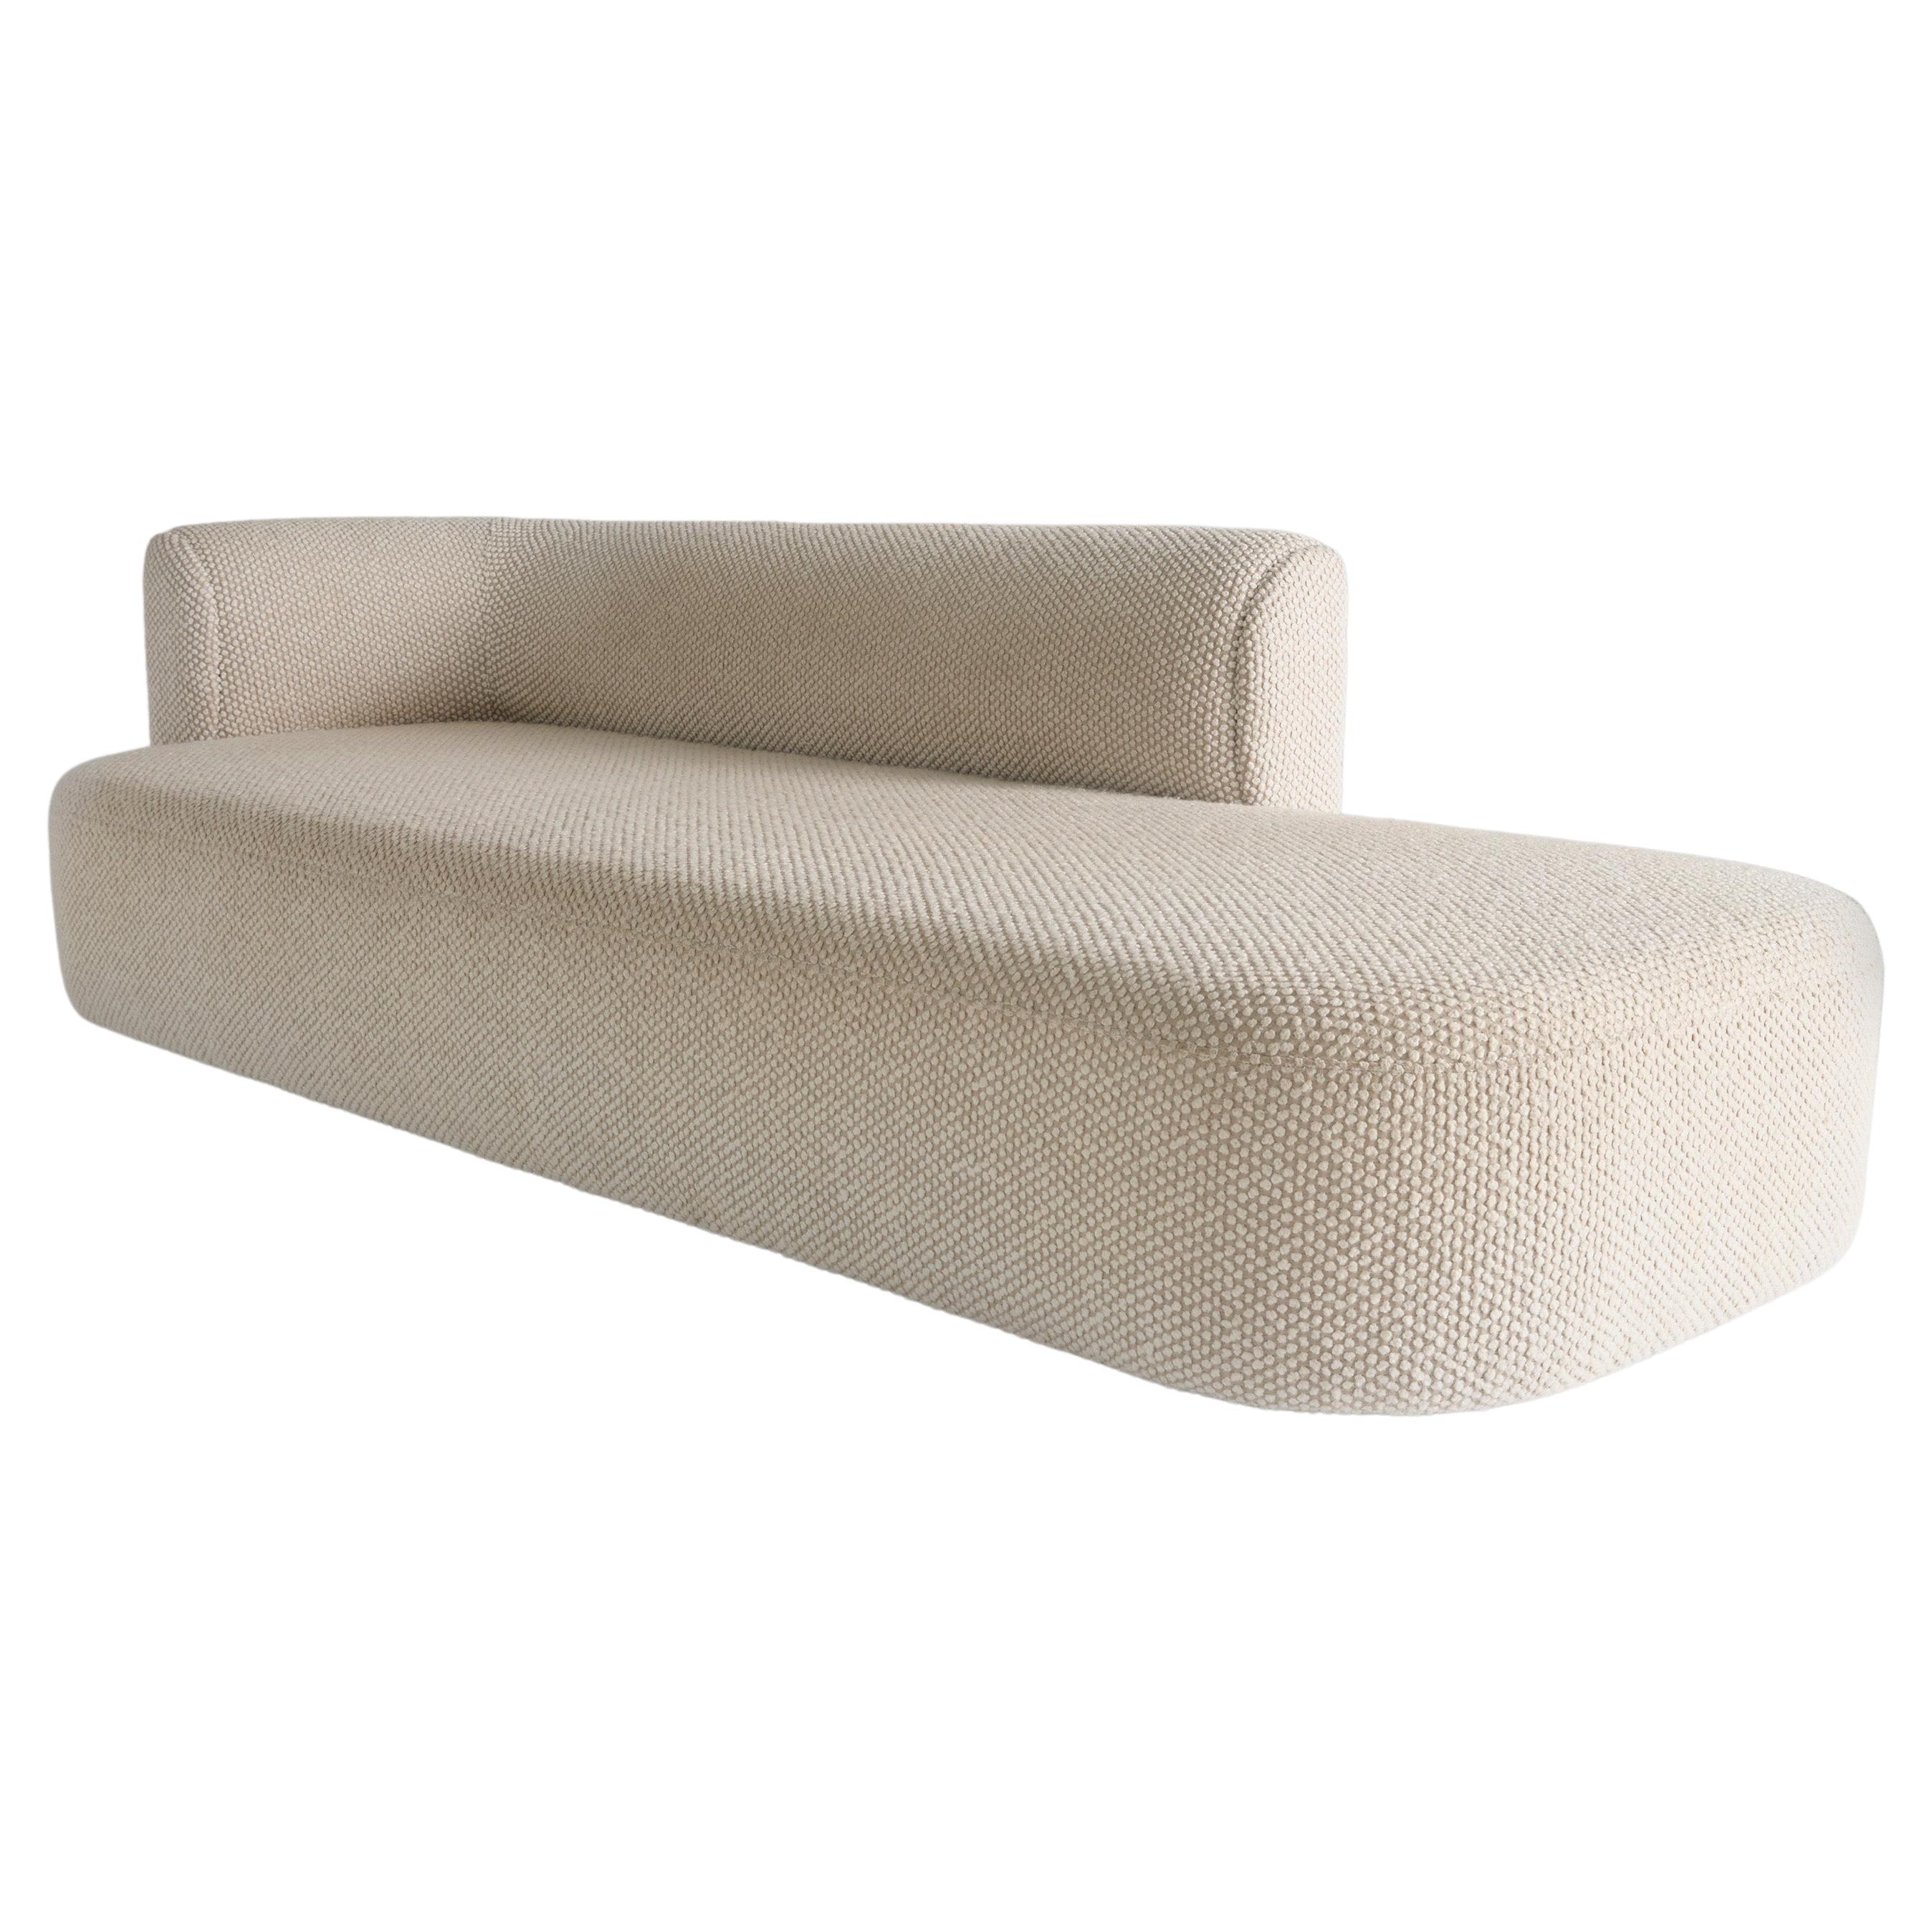 Capper Chaise- 58" by Phase Design, Fabric For Sale